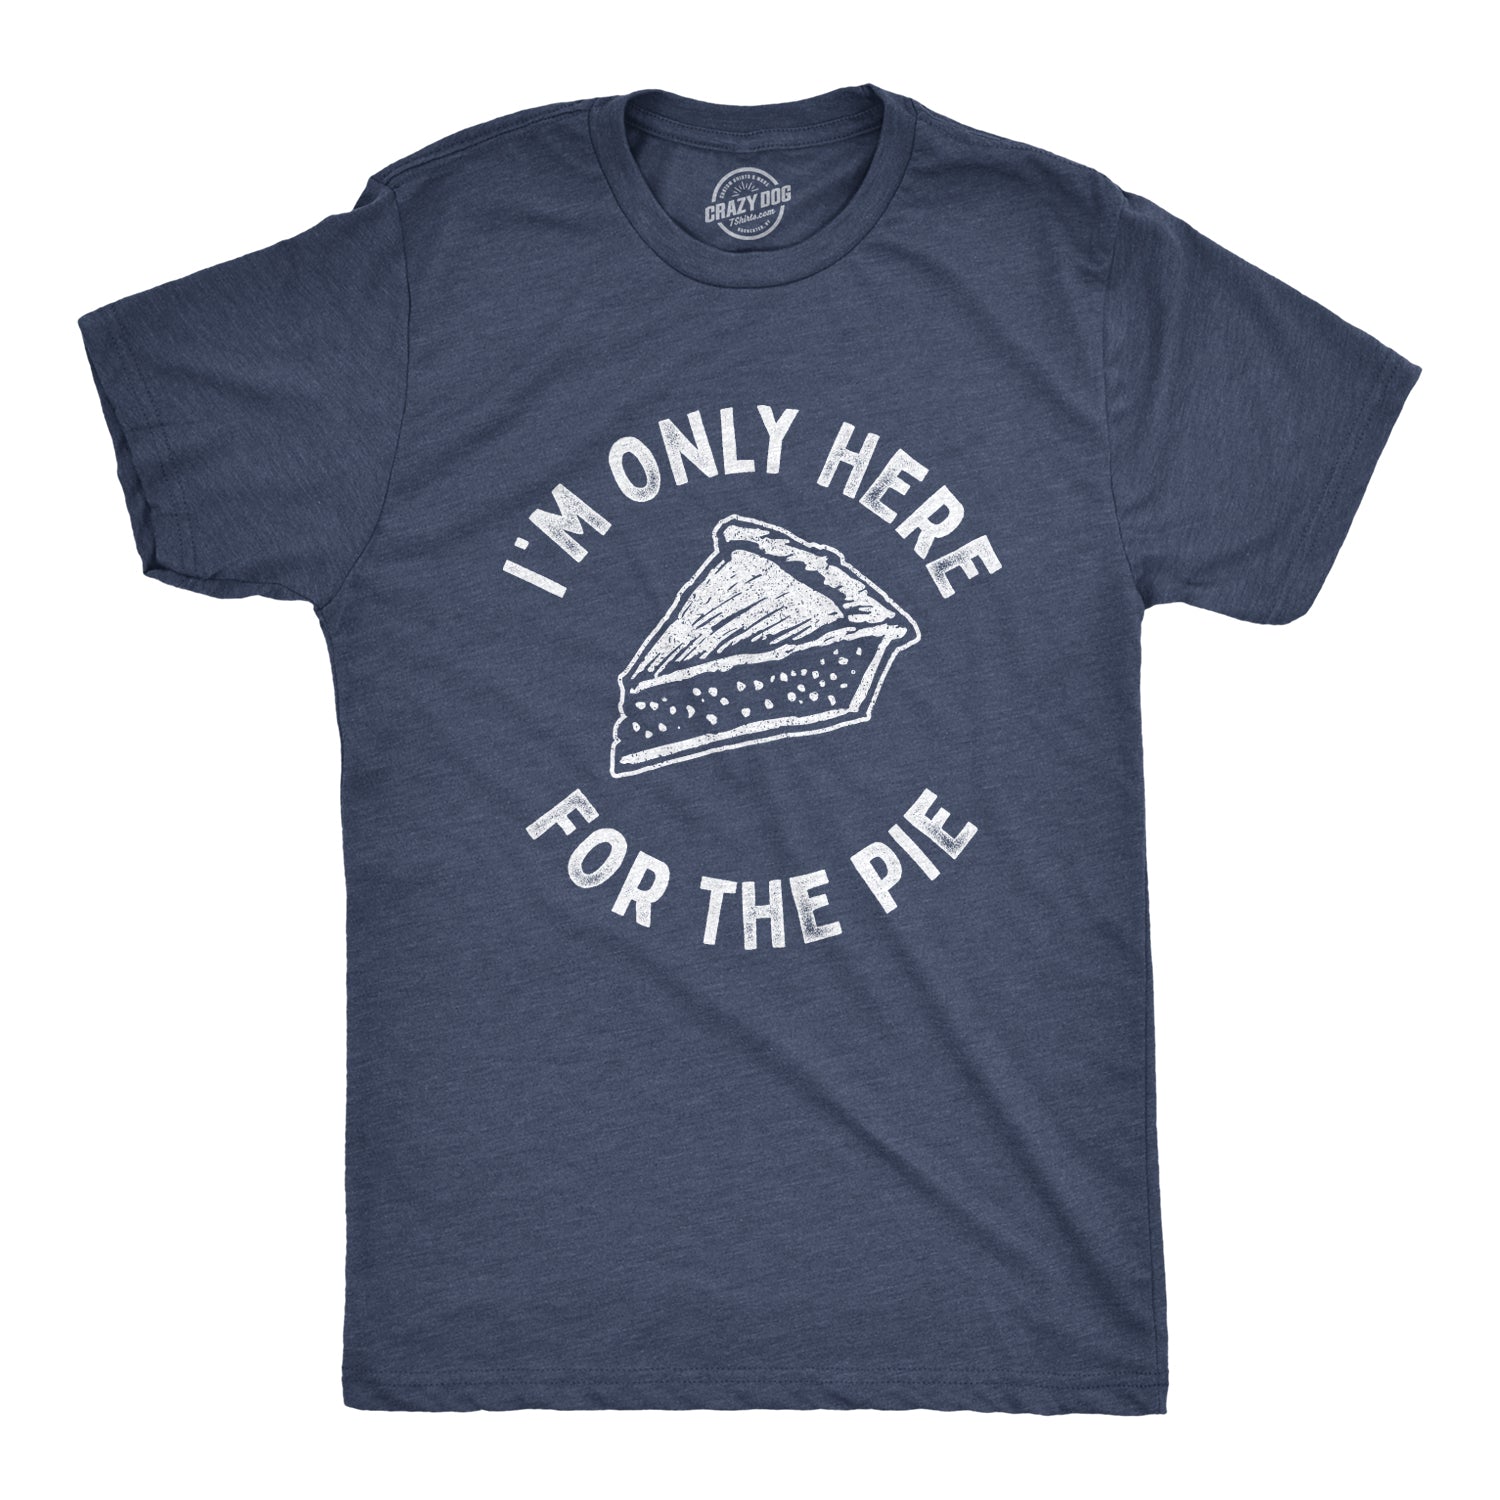 Funny Heather Navy I'm Only Here For The Pie Mens T Shirt Nerdy Thanksgiving Sarcastic Food Tee